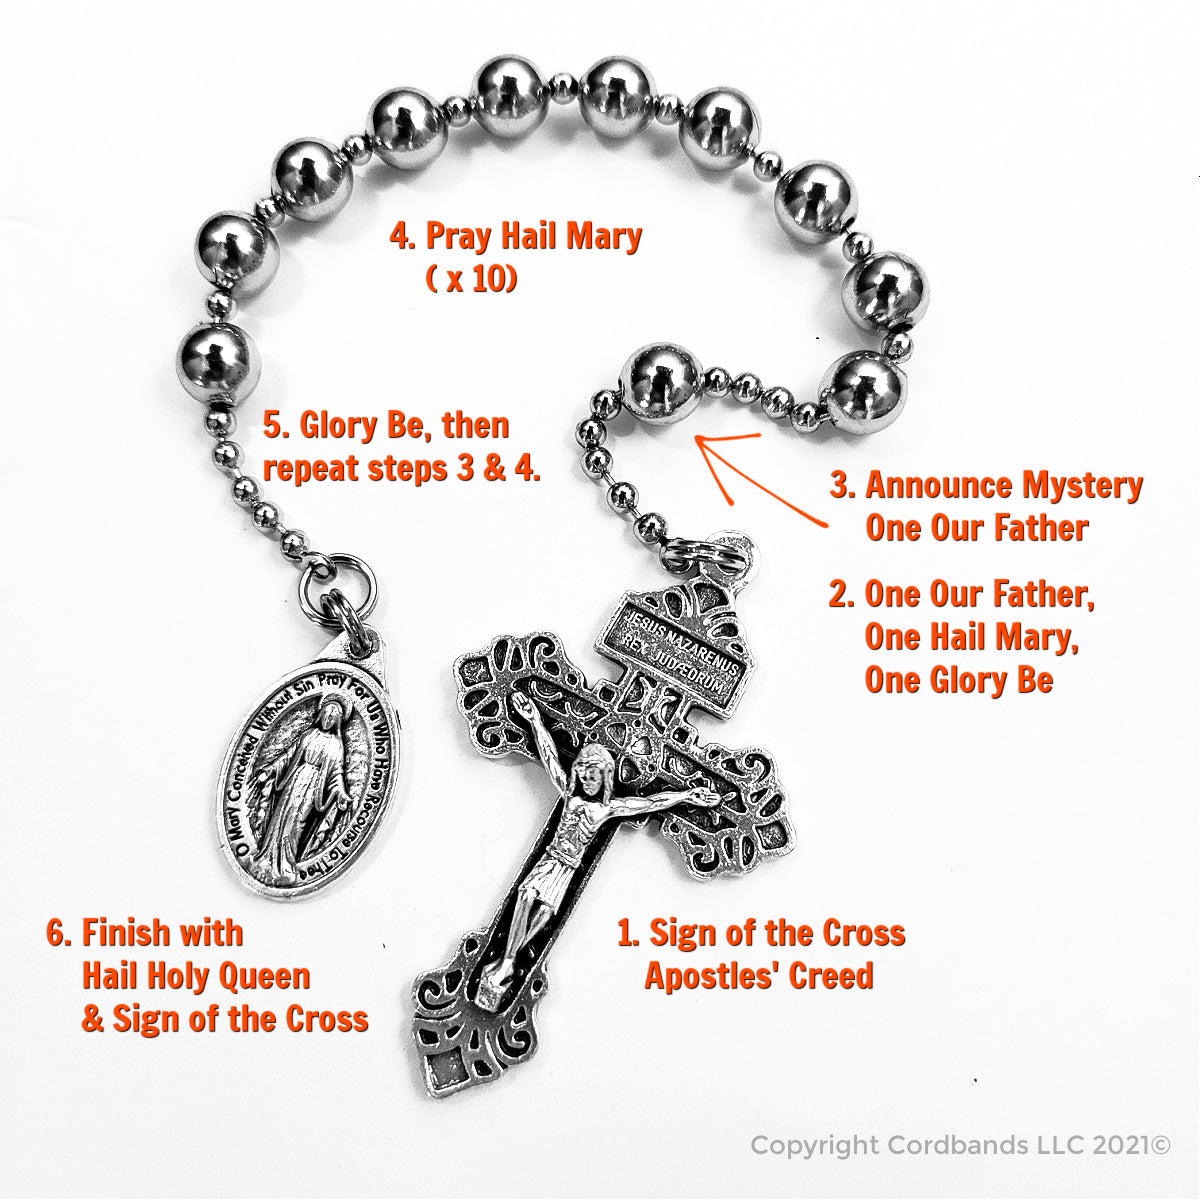 How to Pray on a Pocket One Decade Rosary